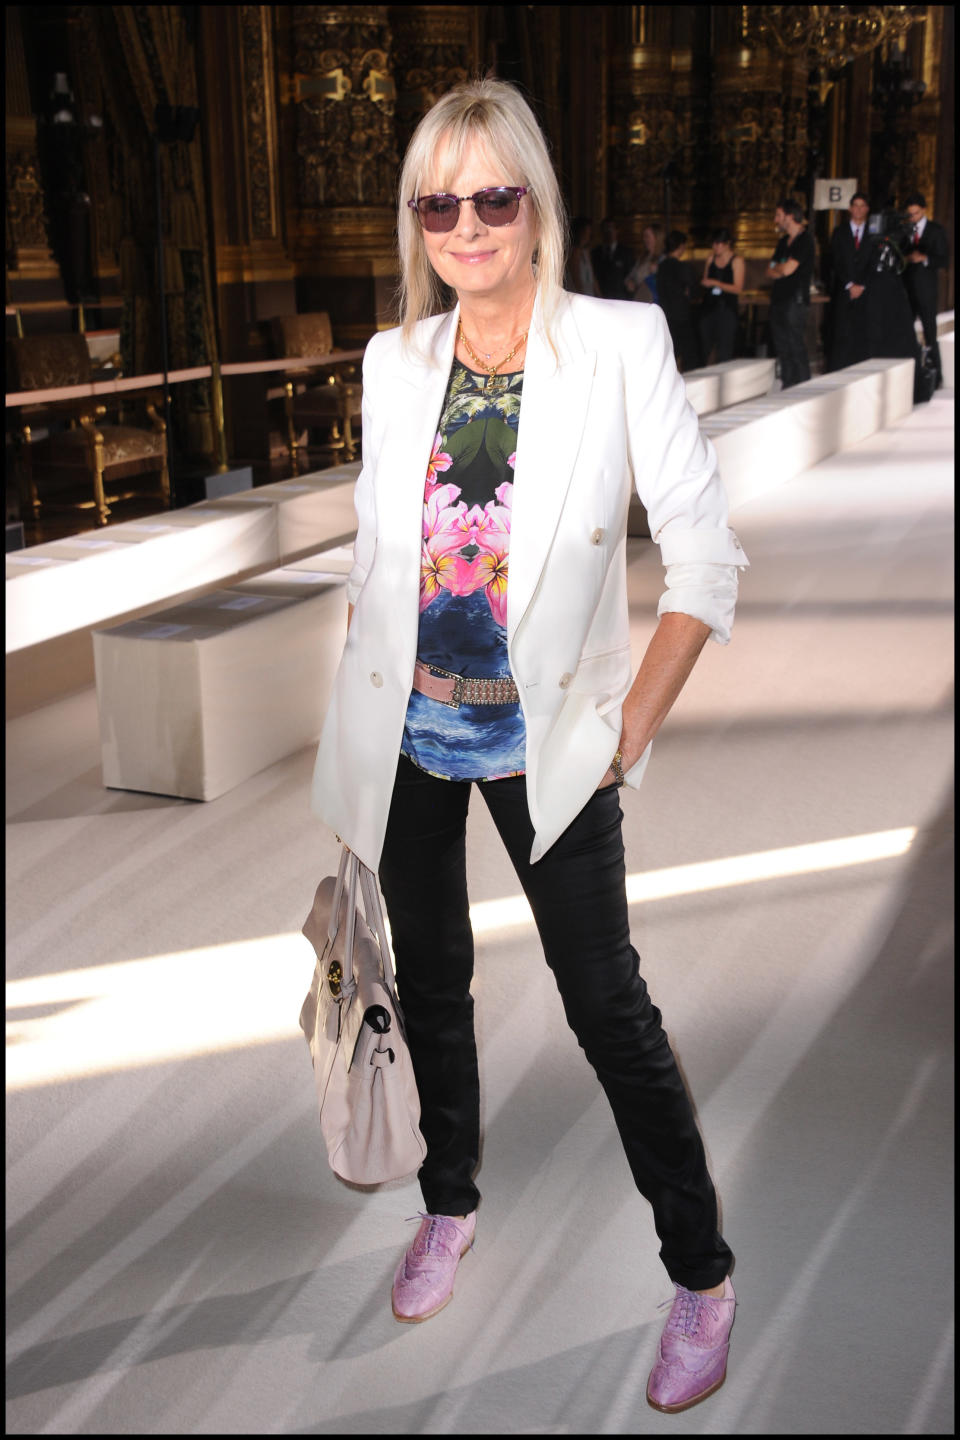 Twiggy attends the Stella McCartney ready-to-wear spring/summer 2012 show during Paris Fashion Week.